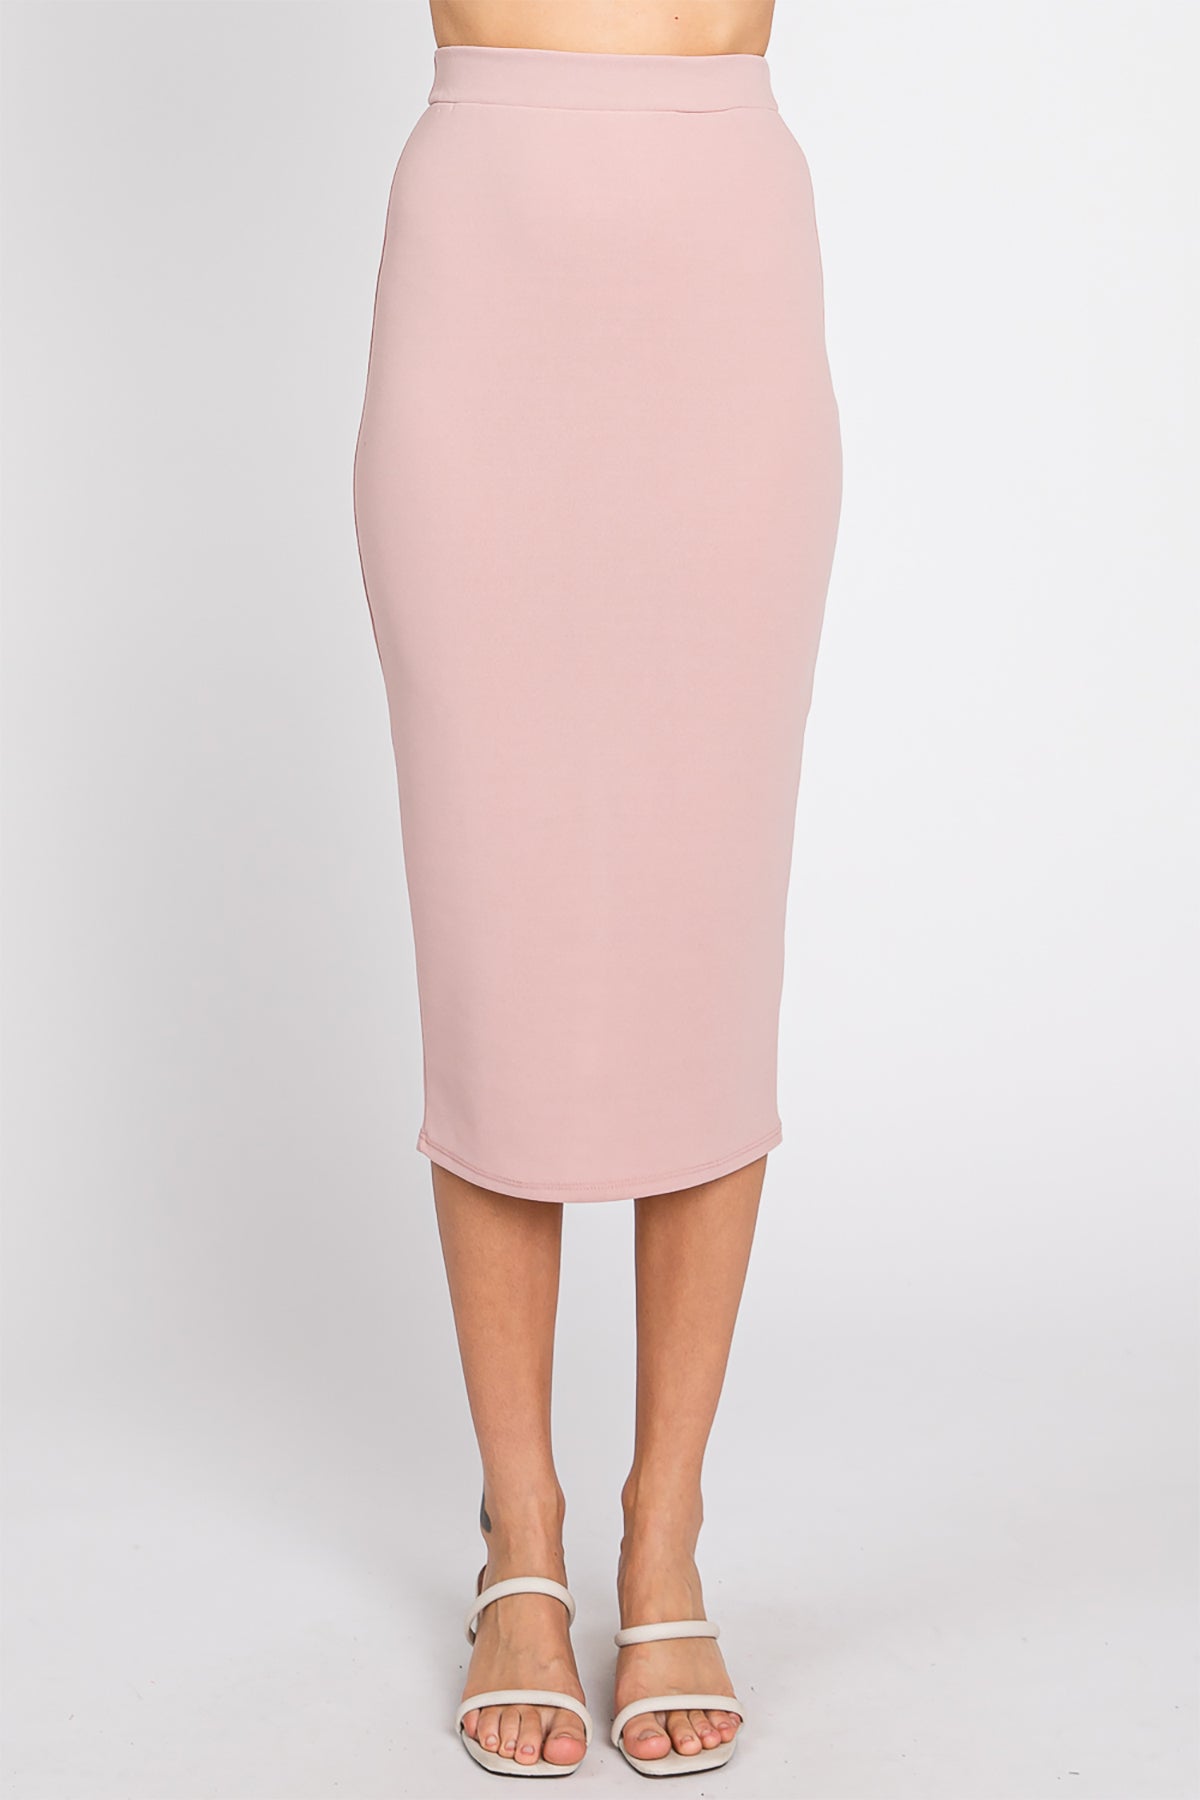 SOLID MIDI PENCIL SKIRT WITH SLIT BACK 1-2-2-1